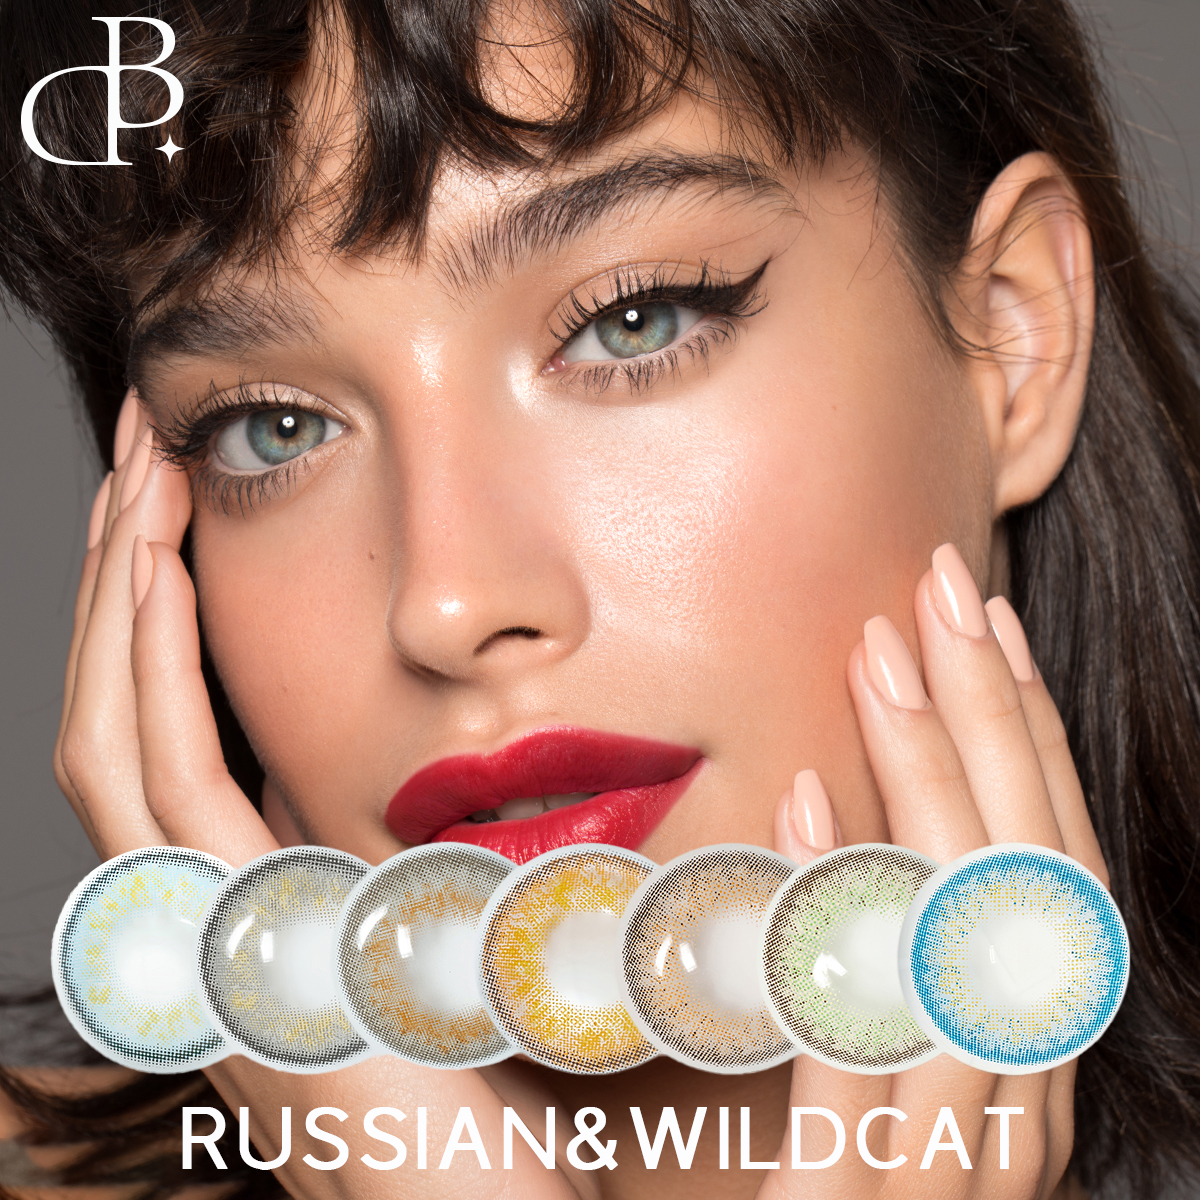 russian&wild-cat Soft Contact Lens Colored 1 Year Sclera Eye Lens Customized Contact Lenses